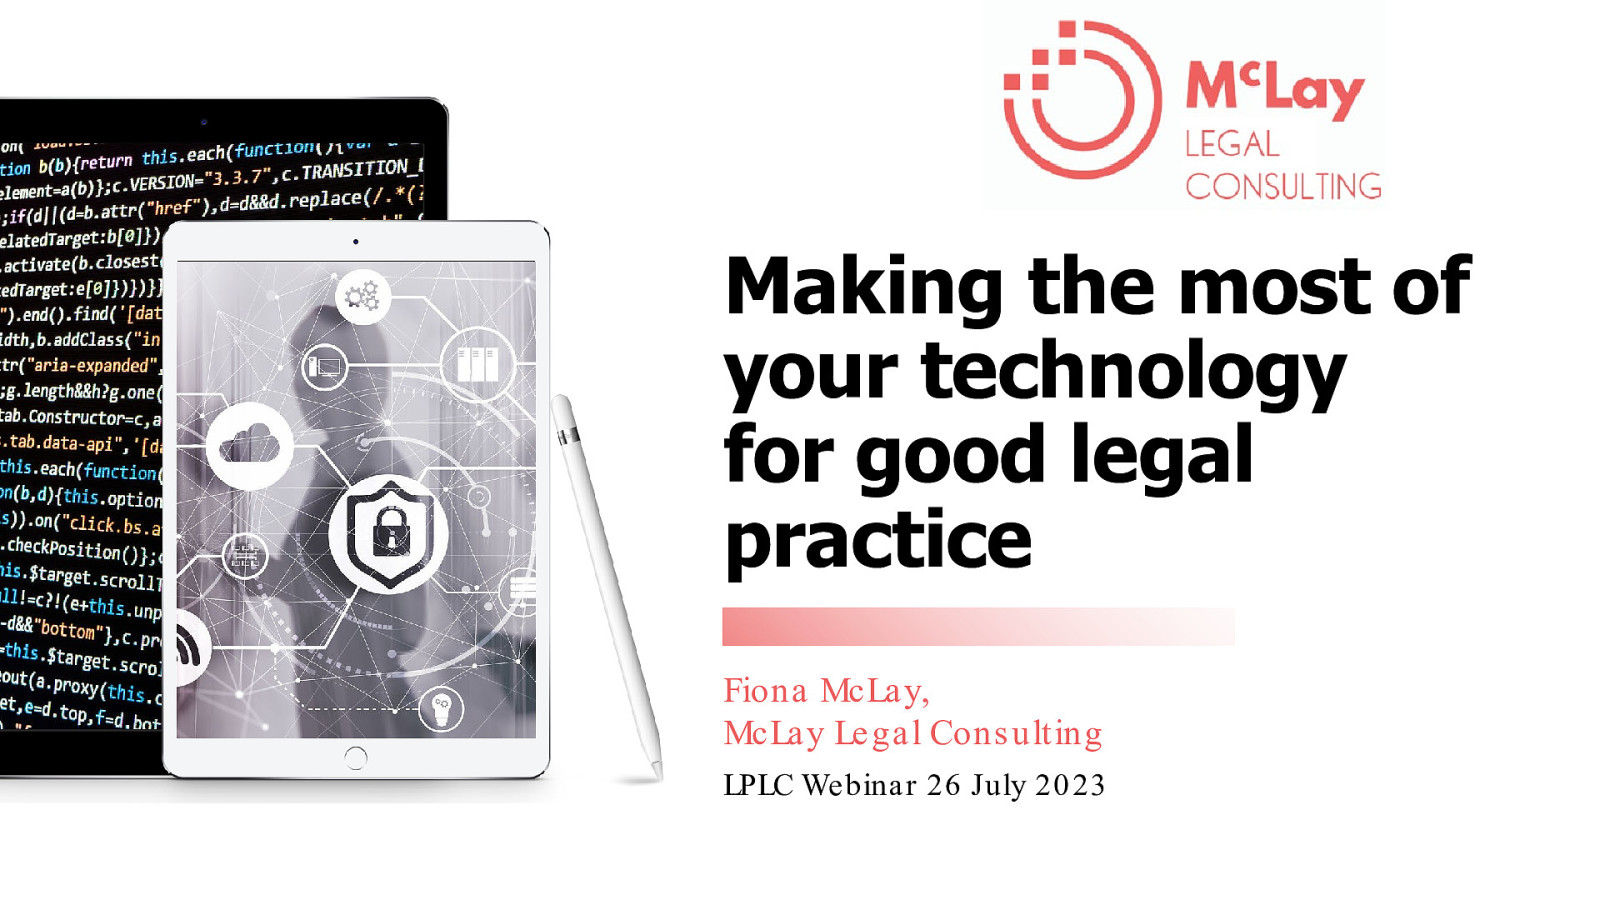 Making the most of your technology for good legal practice